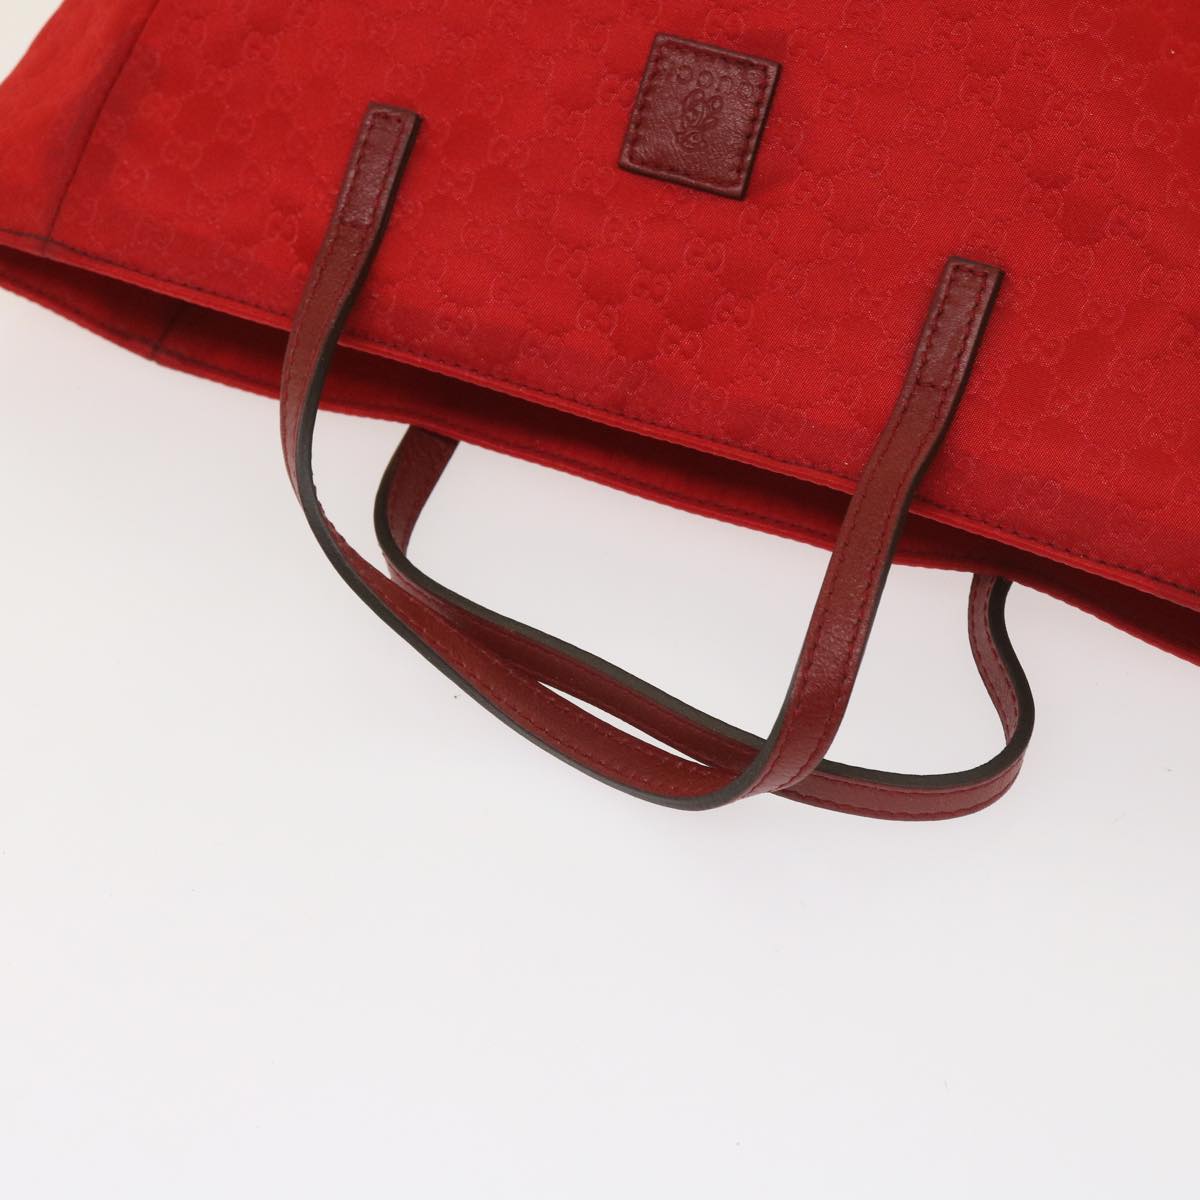 Shop Gucci Gg Canvas Red Synthetic Tote Bag ()